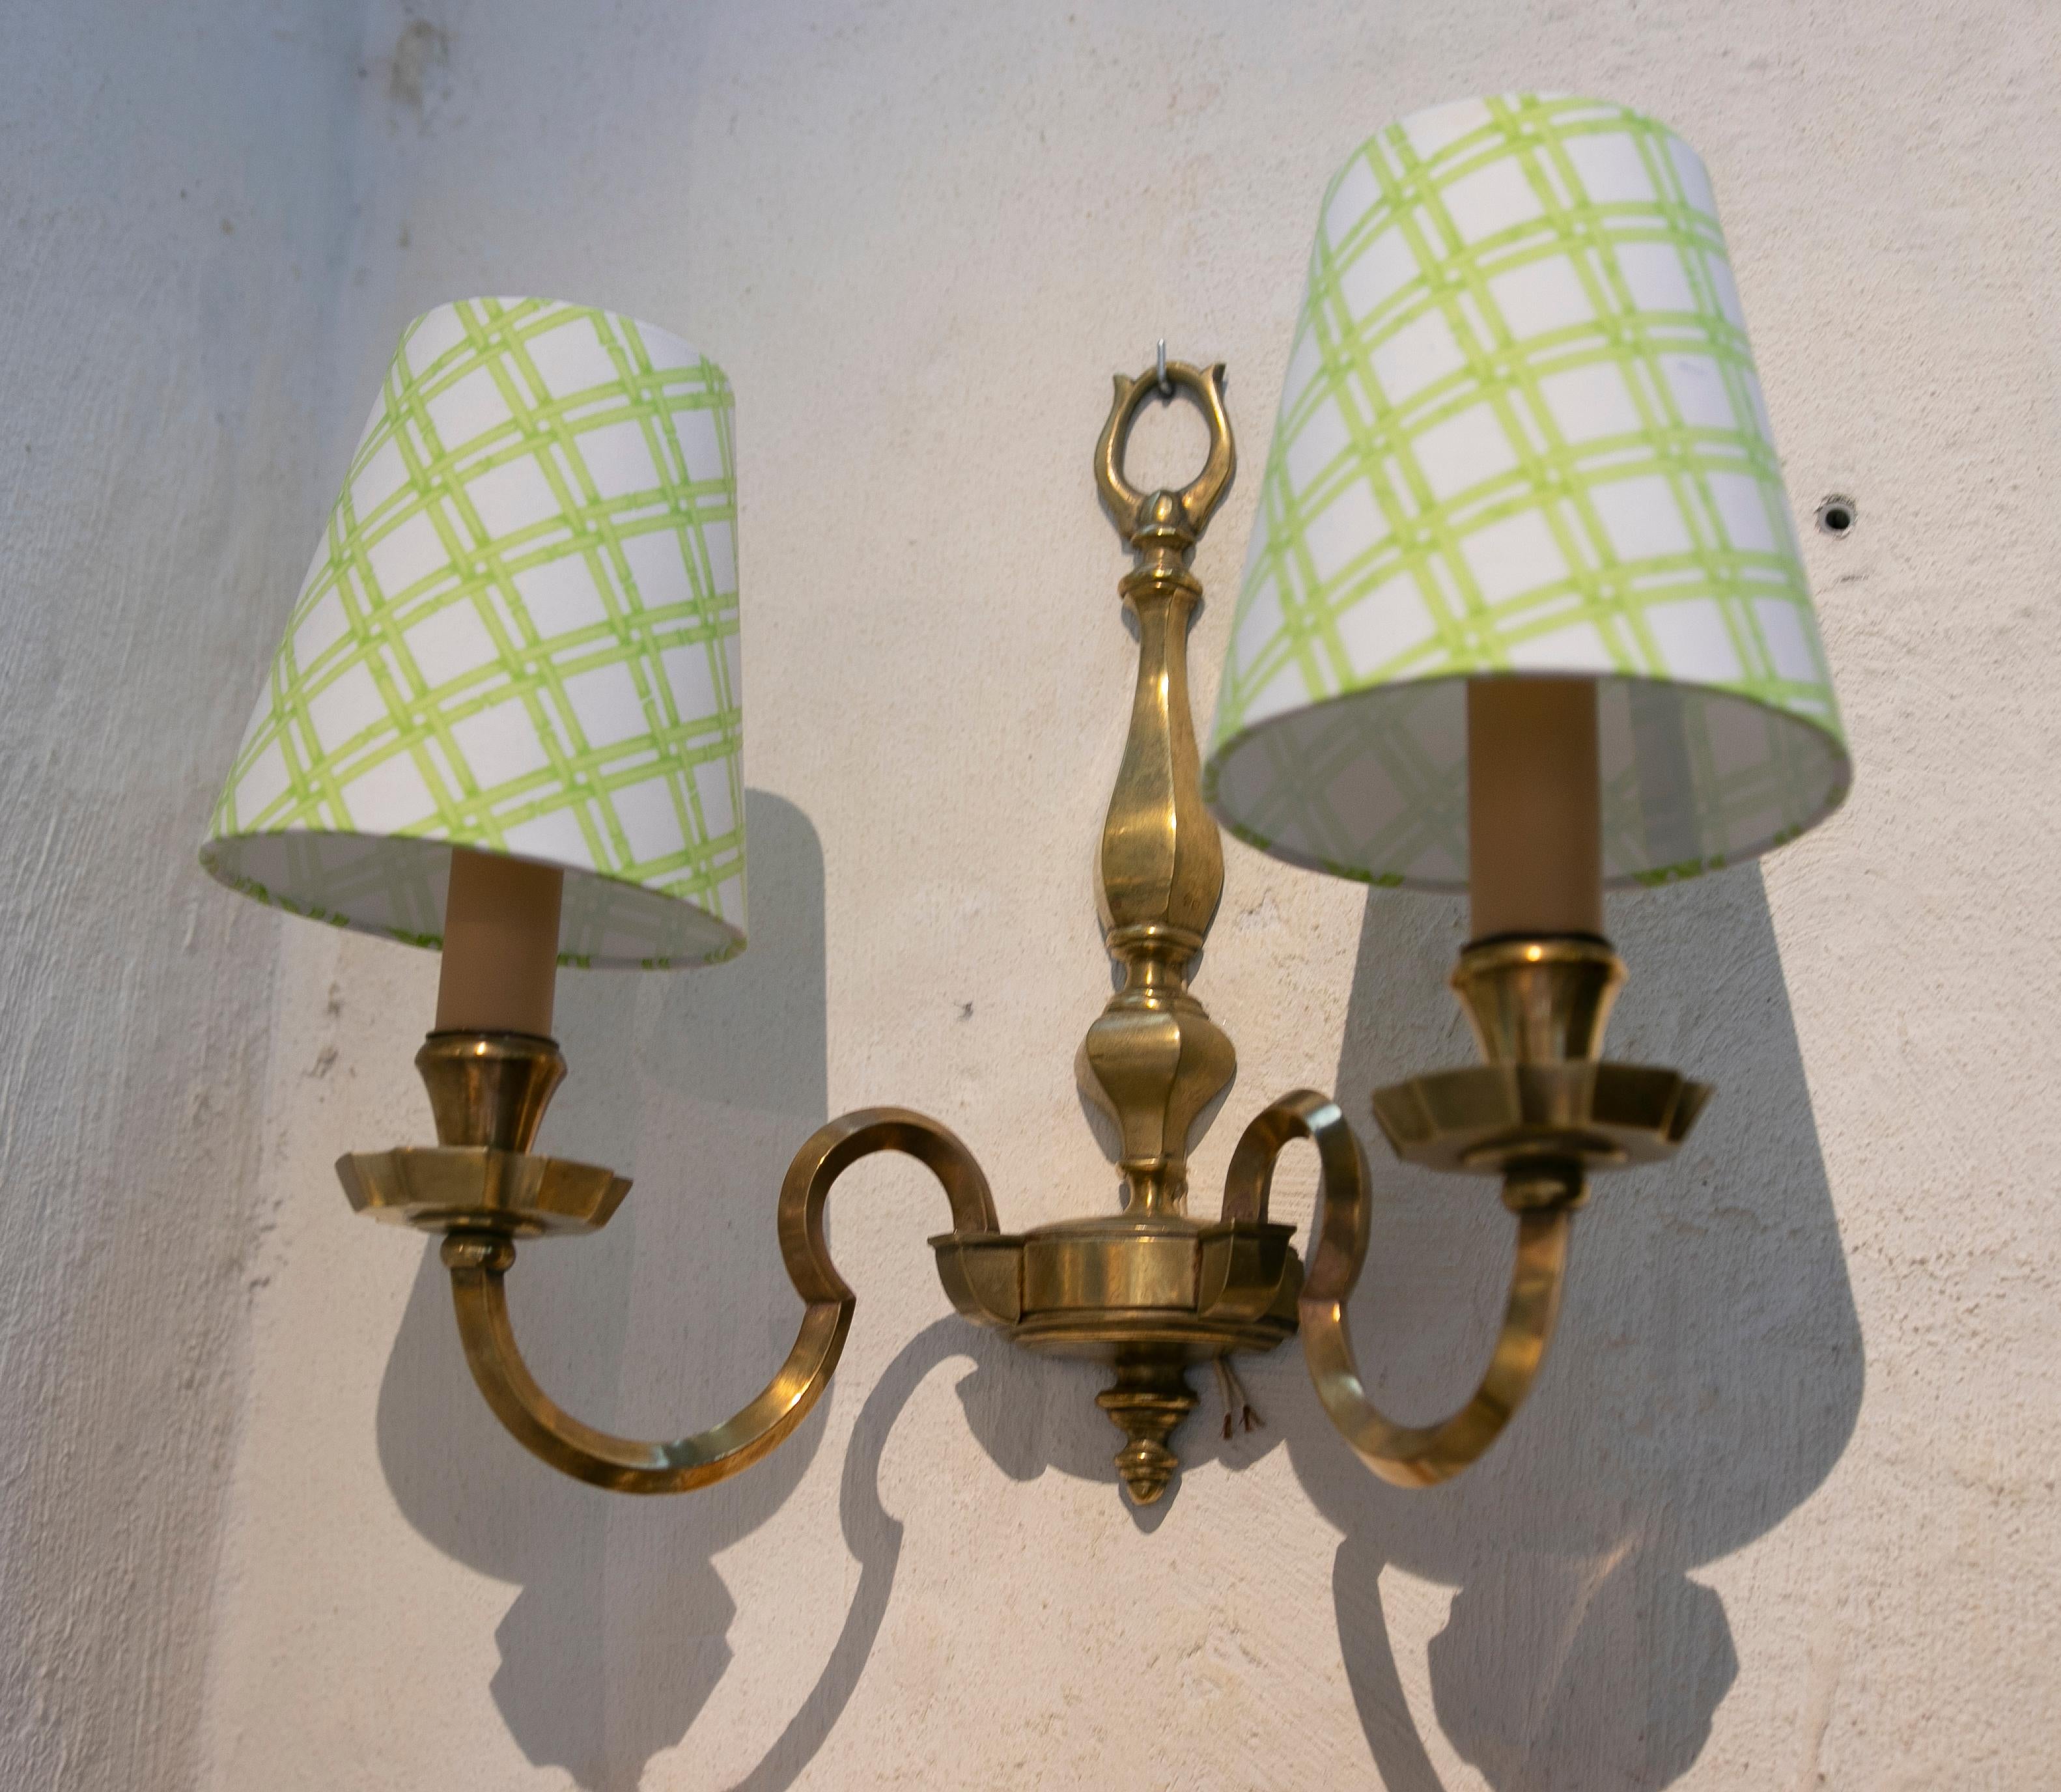 English pair of brass wall sconces
Price does not include the screens.